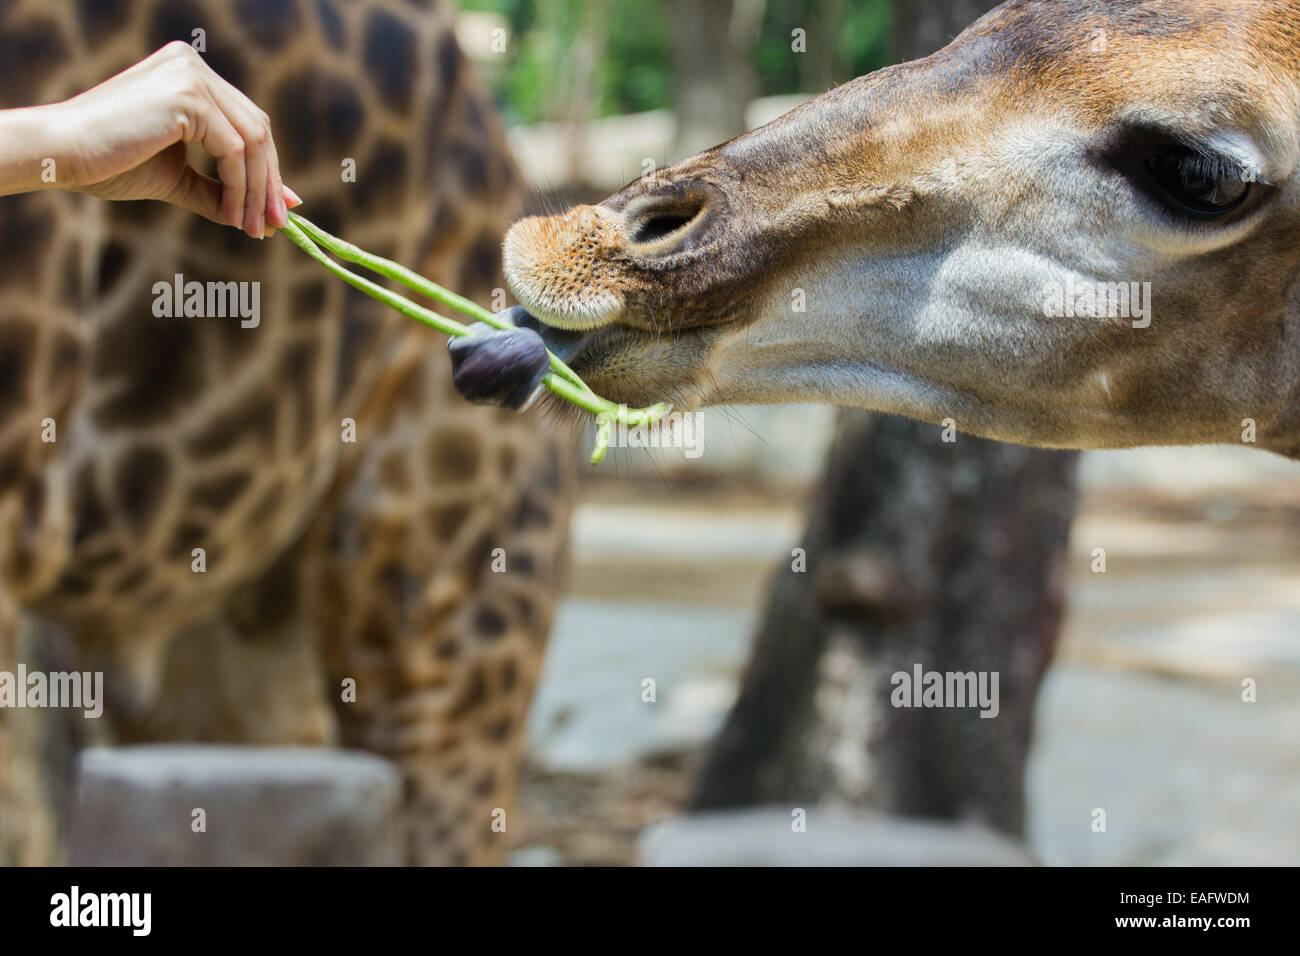 hand of female giving cowpea to giraffe in Thailand Stock Photo